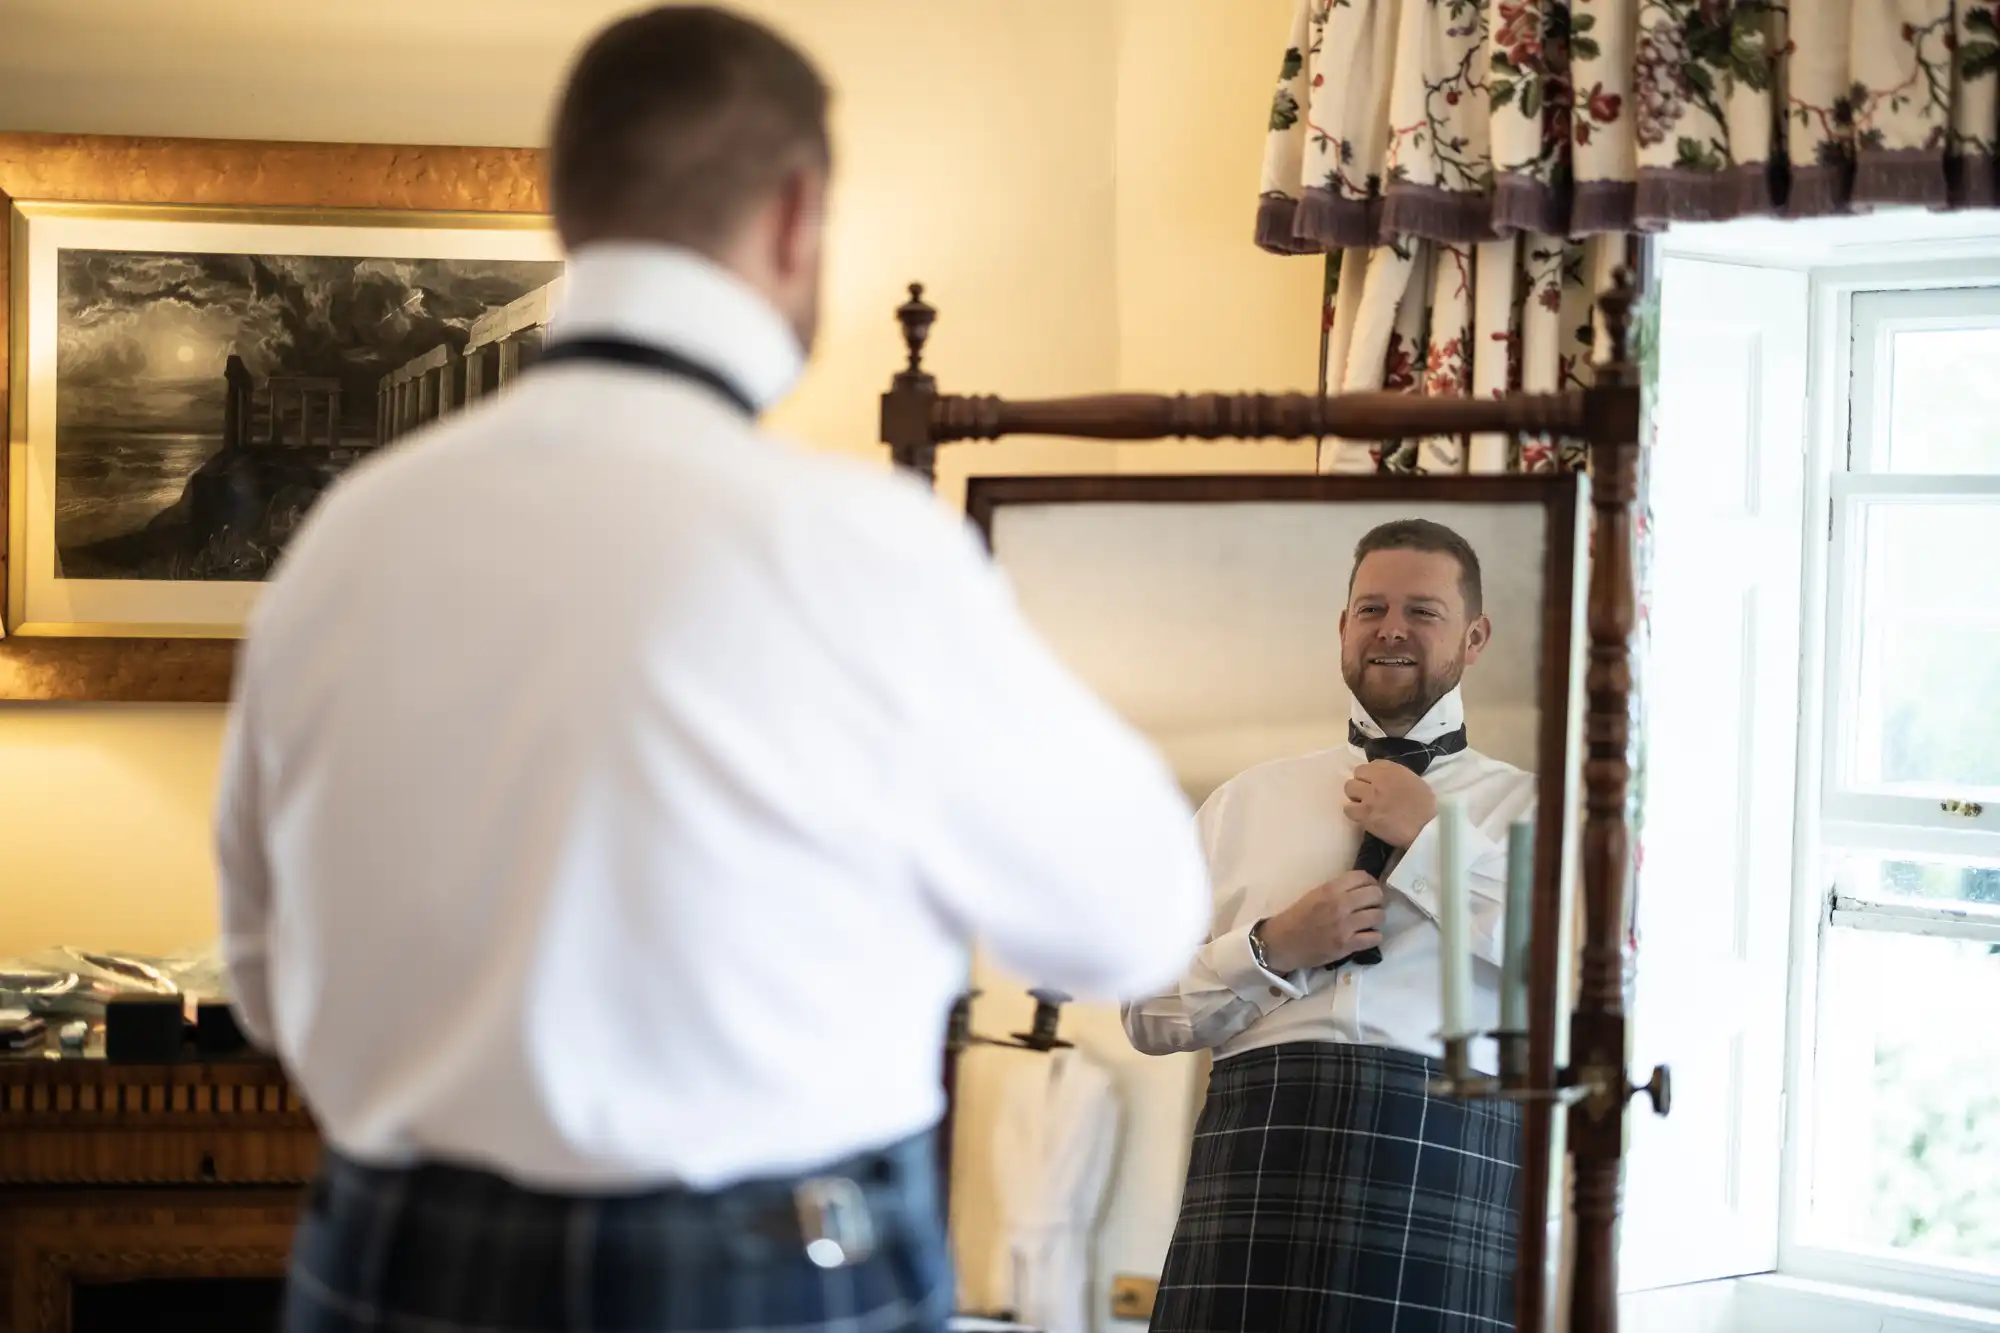 A man in a white shirt and tartan kilt adjusts his tie while smiling at his reflection in a mirror in a warmly lit room.